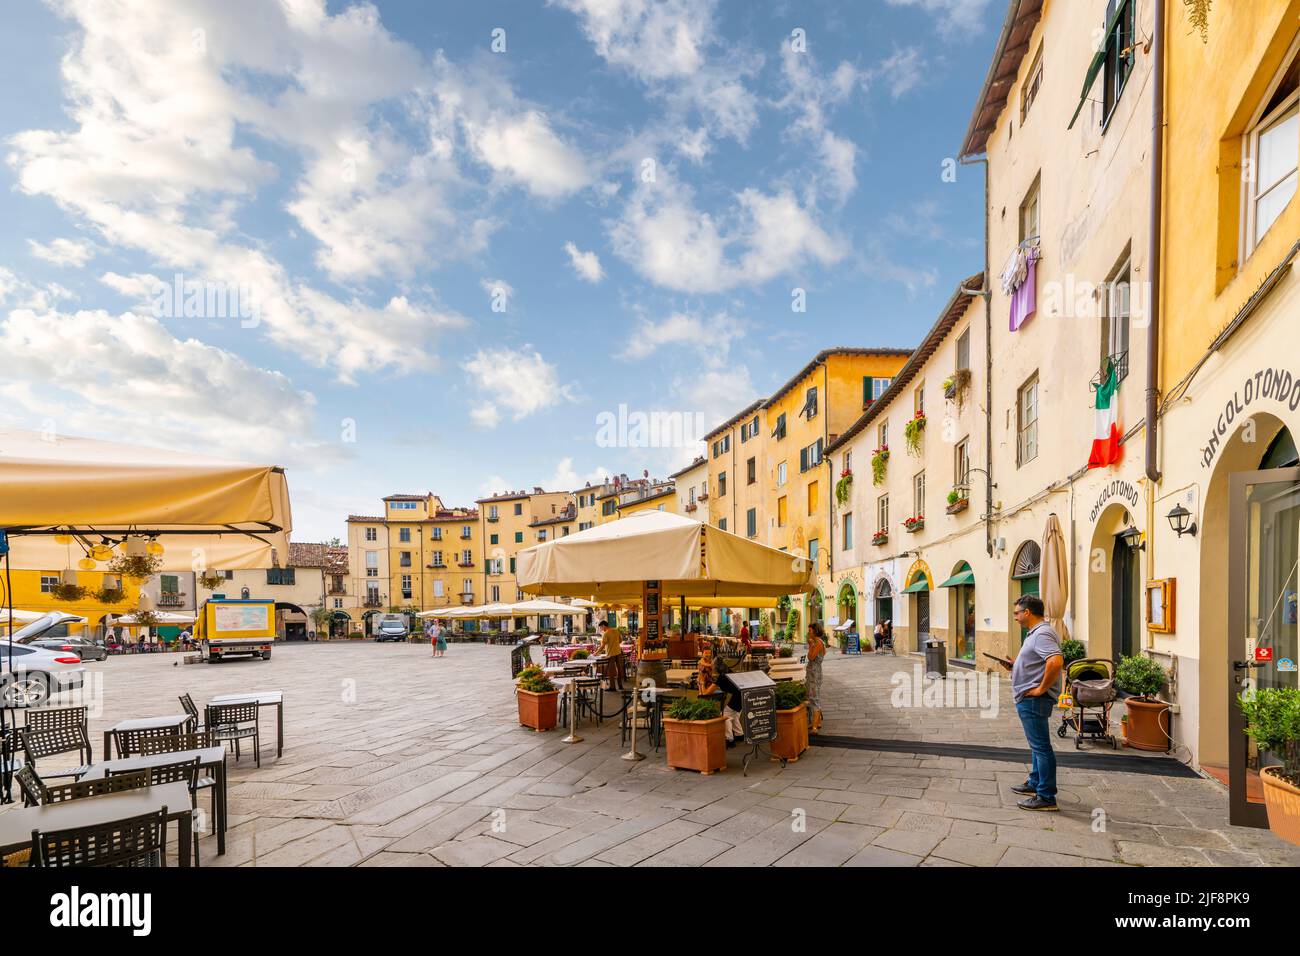 Sidewalk cafes inside the the Piazza del Anfiteatro, the ancient amphitheater in the Tuscan walled town of Lucca, Italy. Stock Photo